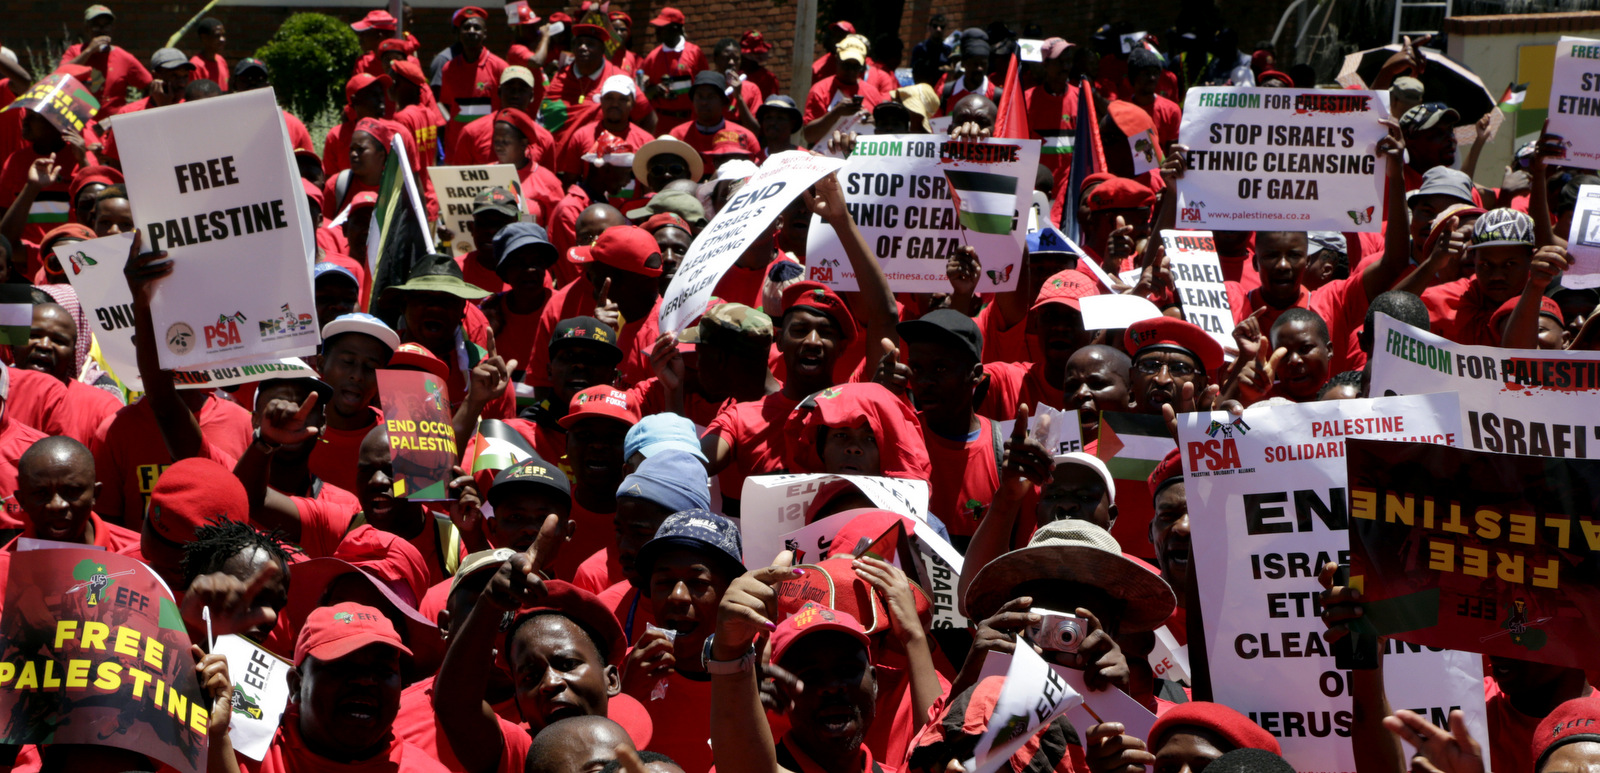 Members of the Economic Freedom Fighters (EFF) protest outside the Israeli embassy in Pretoria, South Africa, Nov. 2, 2017. The EFF are demanding freedom for Palestinians in Israel. (AP/Themba Hadebe)